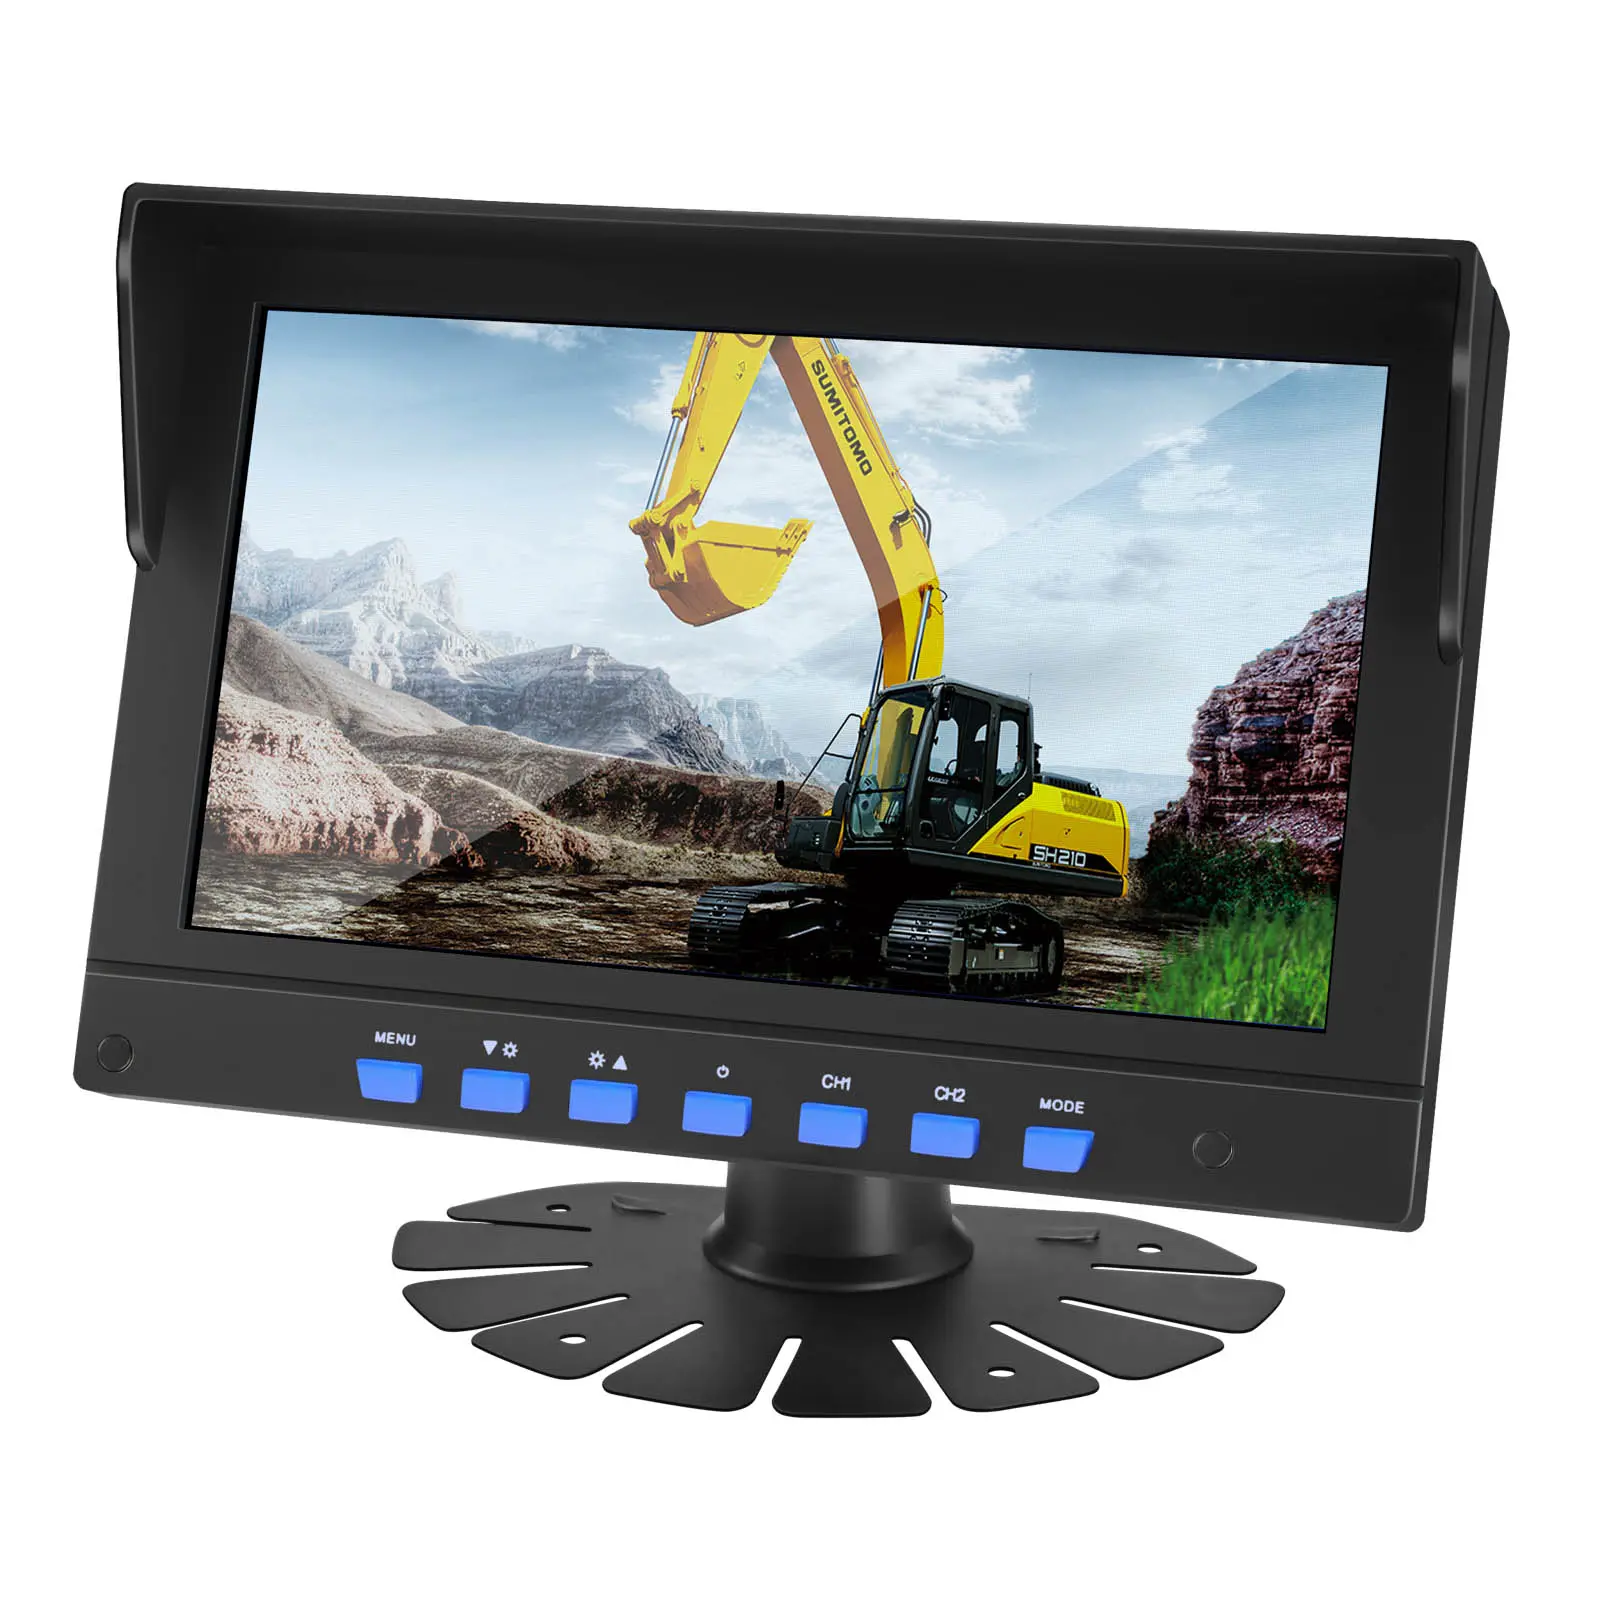 7 inch TFT Full Color portable remote rearview digital side view Monitor Display car monitores for truck bus